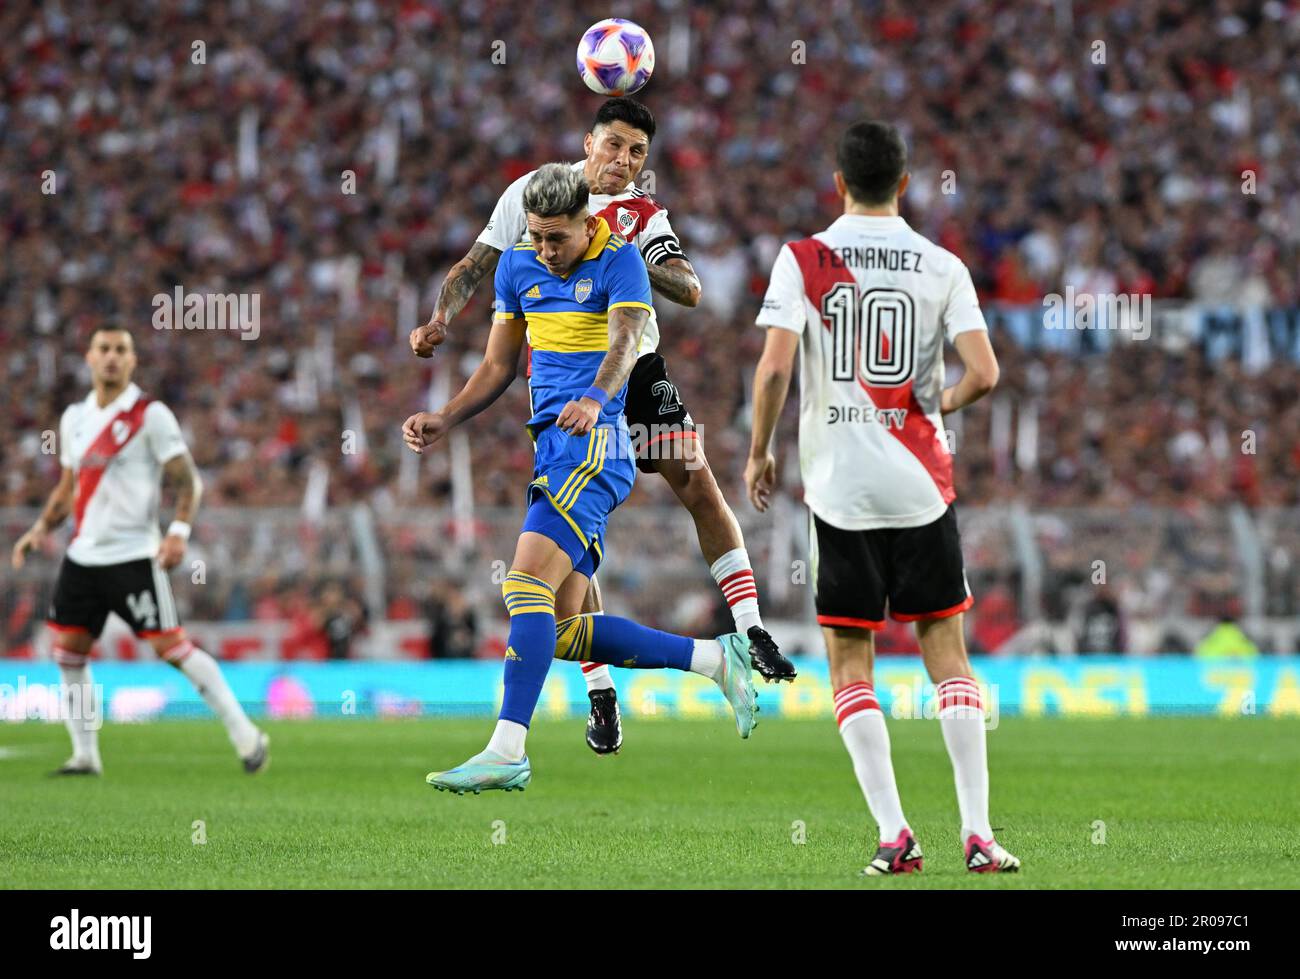 Buenos Aires, Argentina, 07th May, 2023. Enzo Perez of River Plate battles for possession with Luis Vazquez of Boca Juniors, during the match between River Plate and Boca Juniors, for the Argentinian championship 2023, at Monumental de Nunez Stadium, in Buenos Aires on May 07. Photo: Luciano Bisbal/DiaEsportivo/Alamy Live News Stock Photo